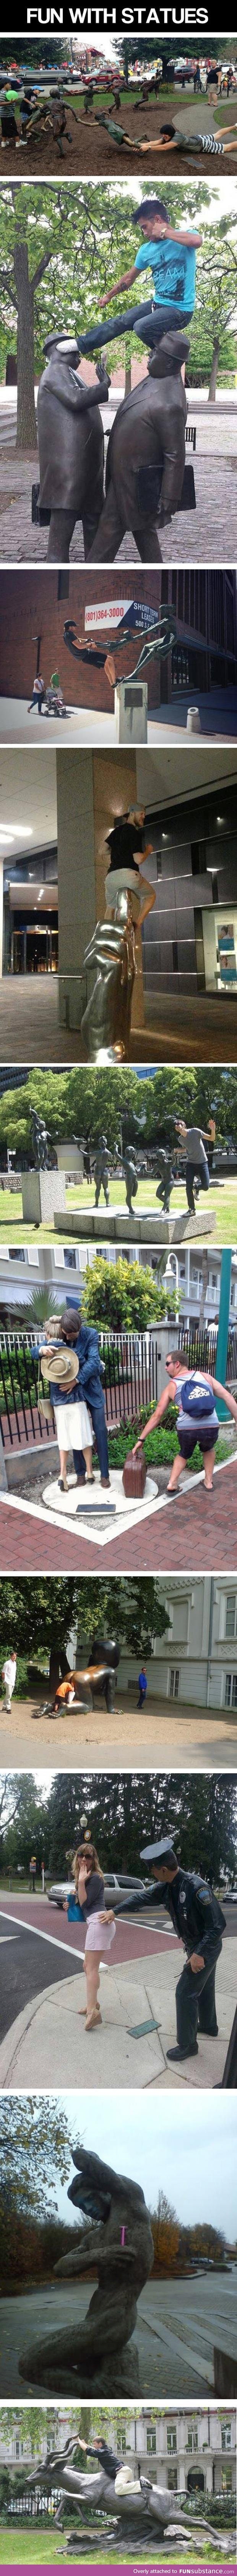 Fun with statues